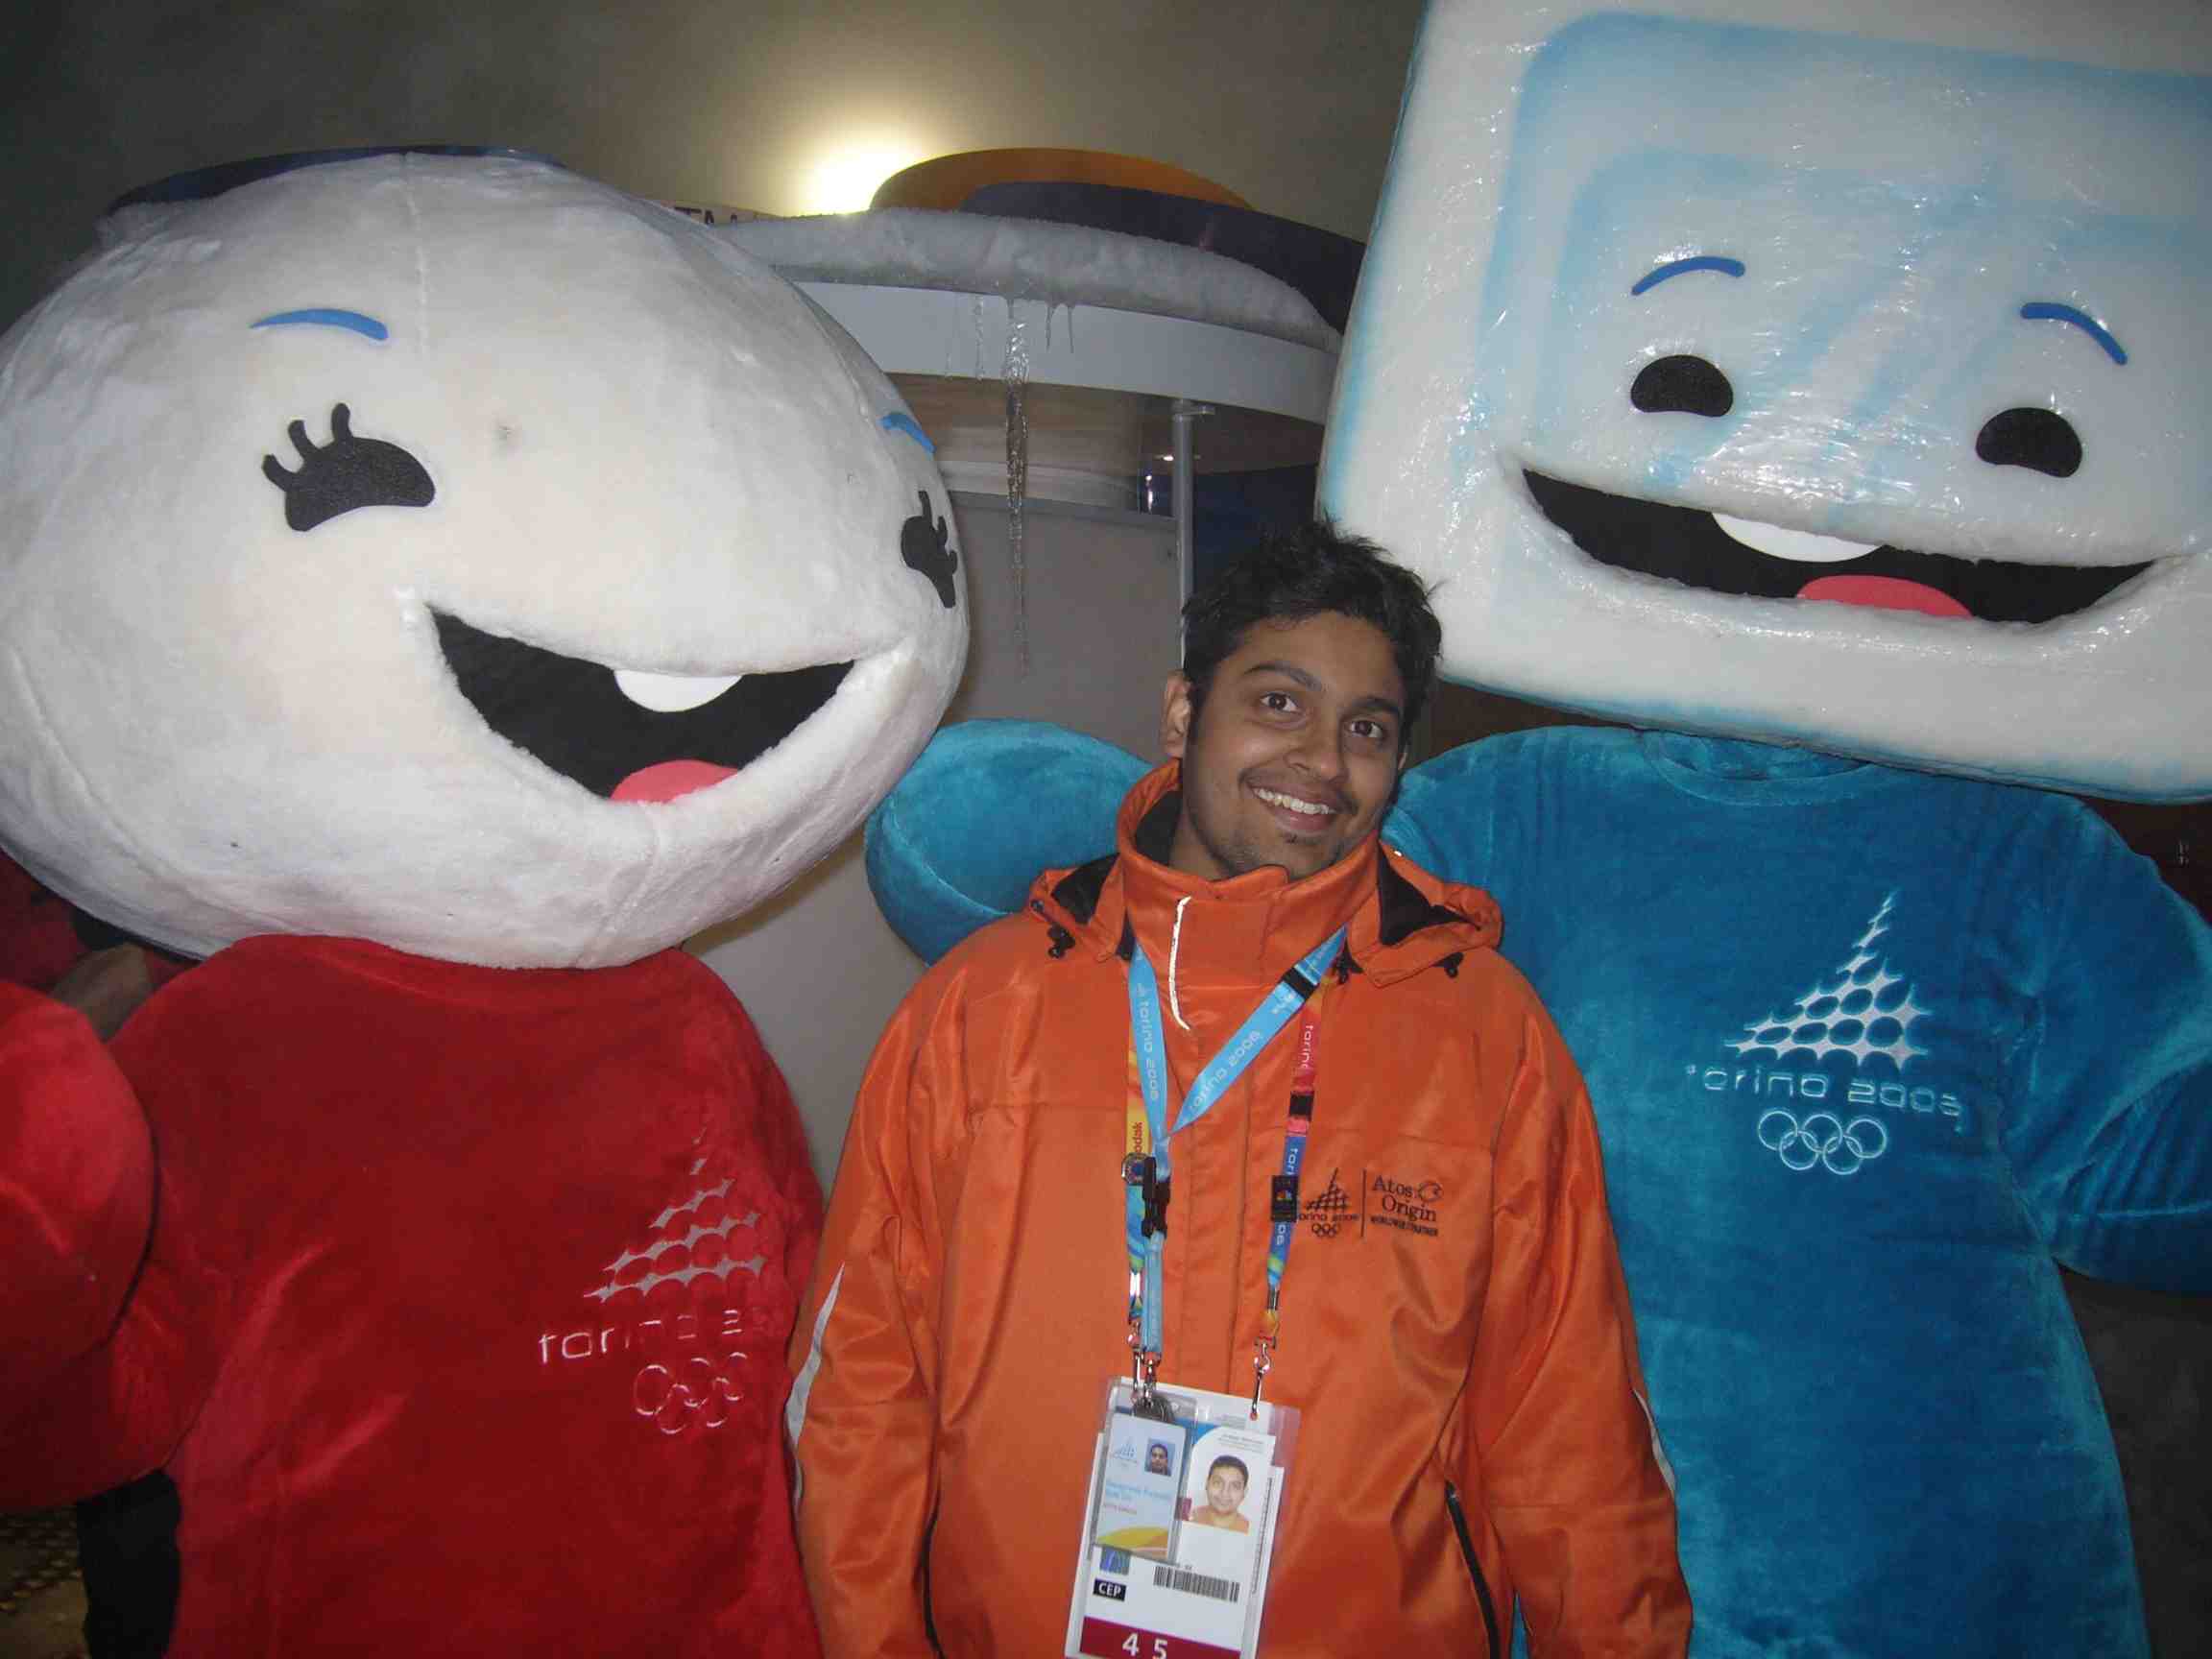 Torino, Italy with the mascots of the Winter Olympics